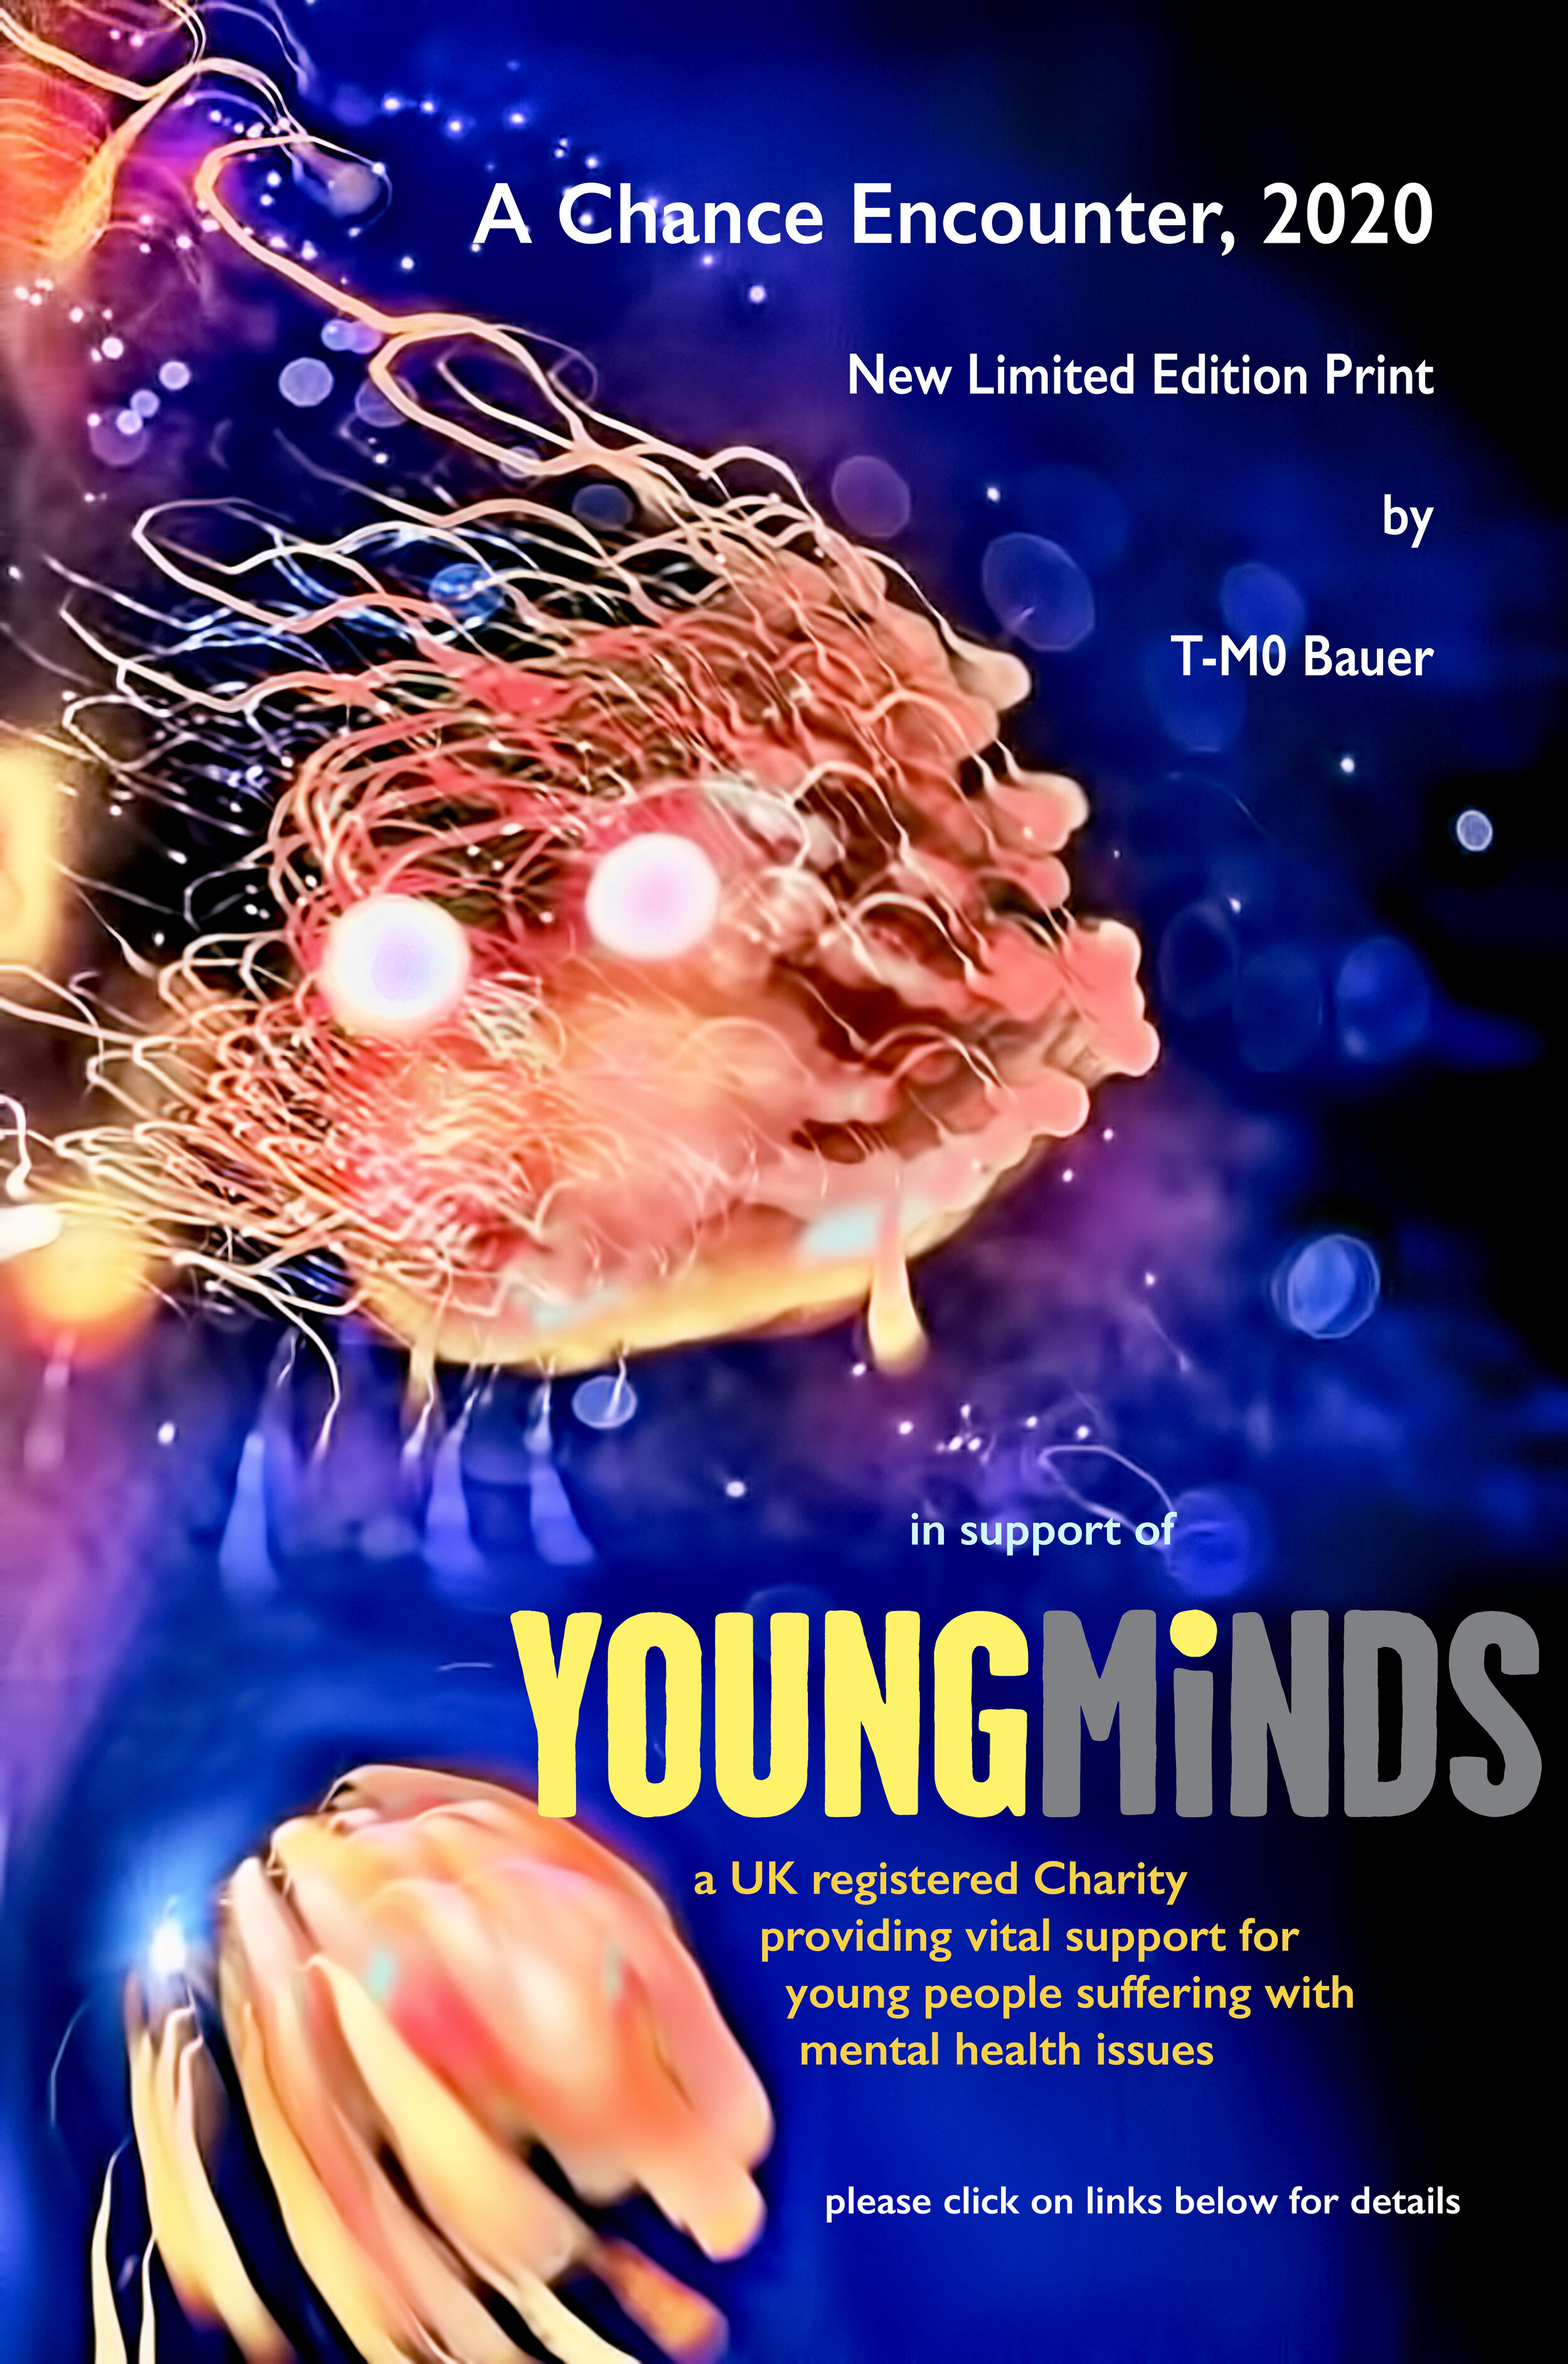 Young Minds Charity — t-mo Bauer